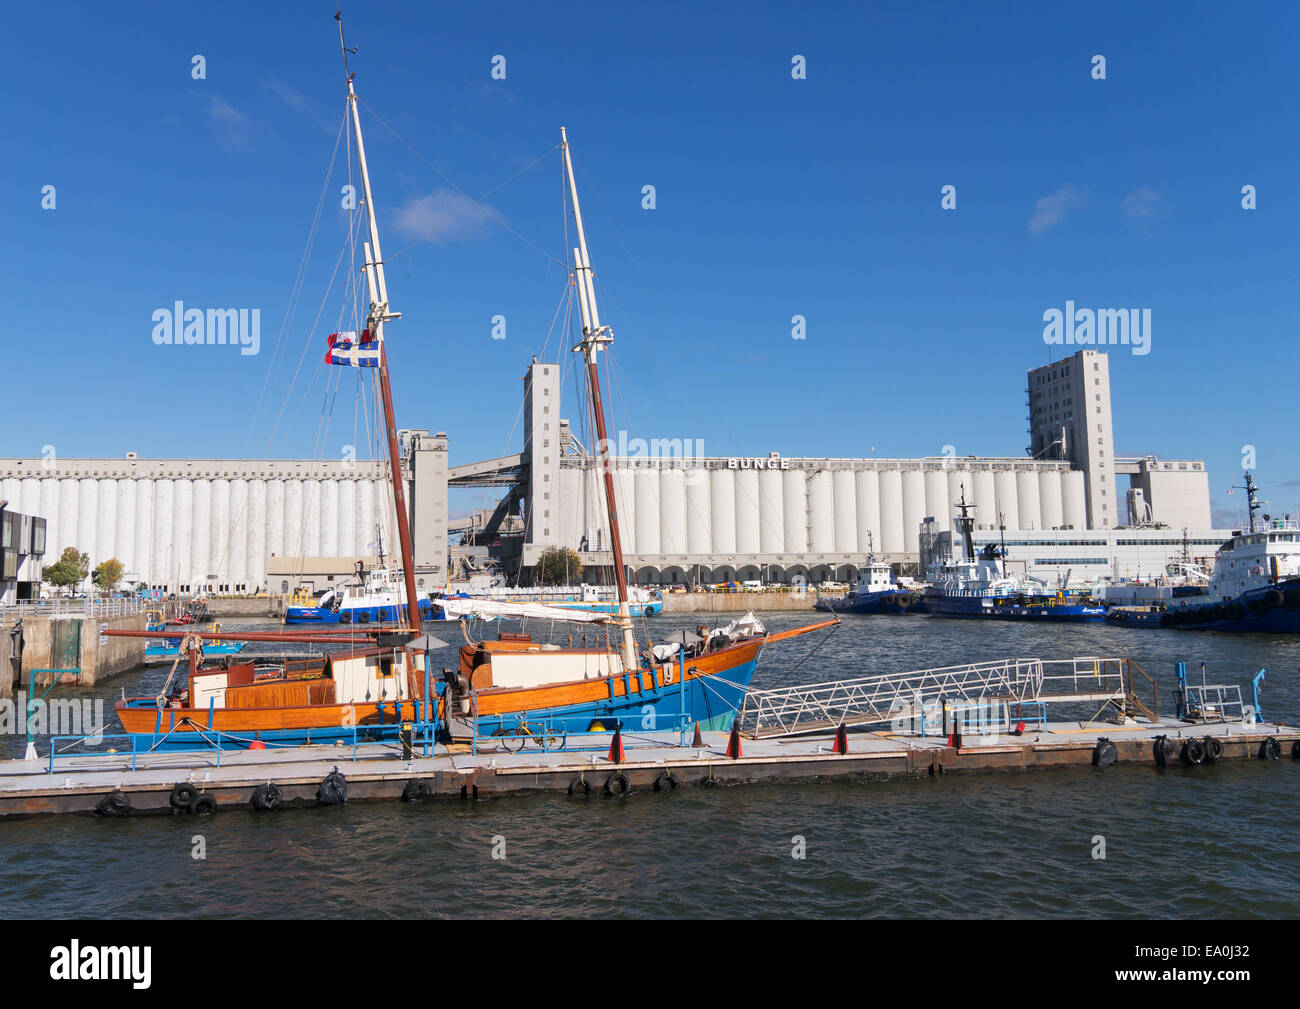 Old wooden sailing boat moored in front of the Bunge grain silos, Quebec City, Quebec, Canada Stock Photo